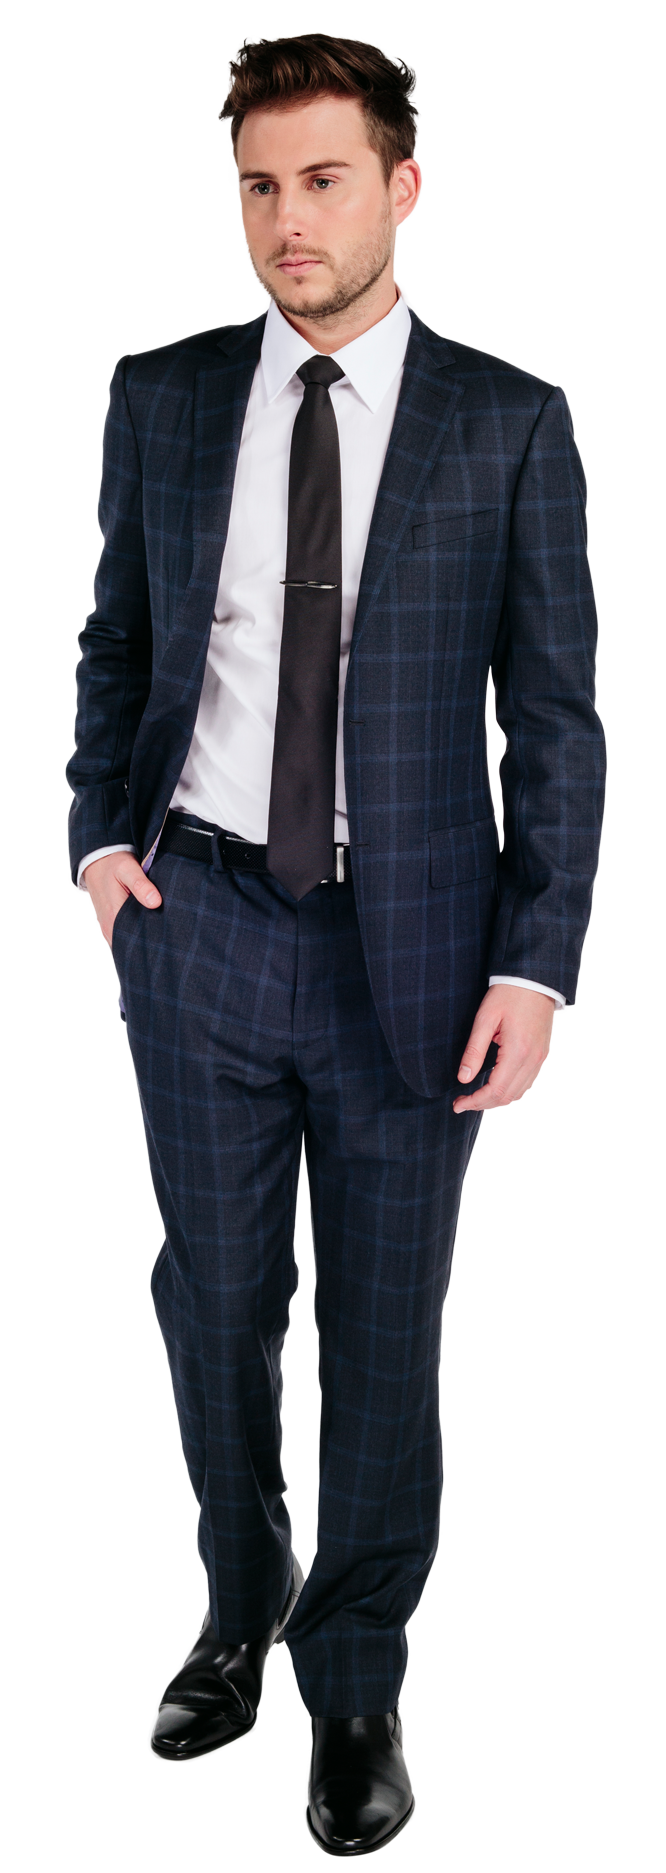 Man In Suit PNG Photo